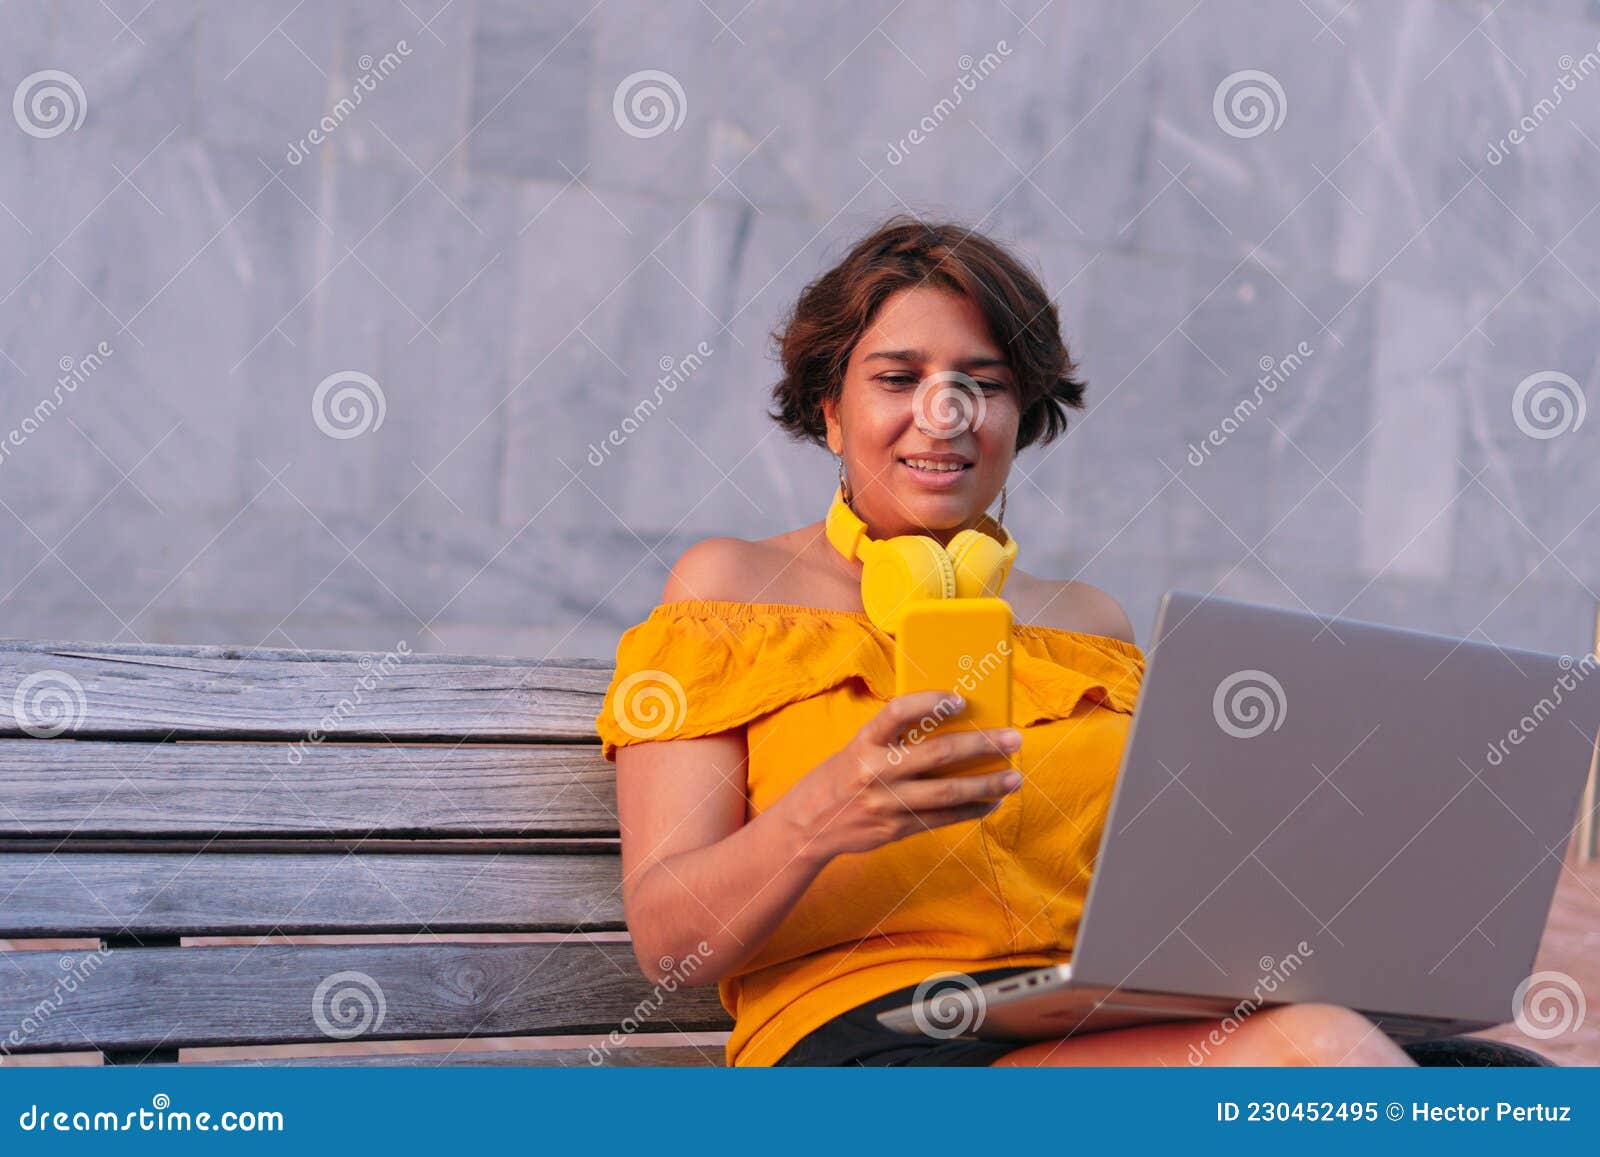 Latin Mature Woman Using A Cell Phone And Laptop While Sitting On A Bench In The Park Stock